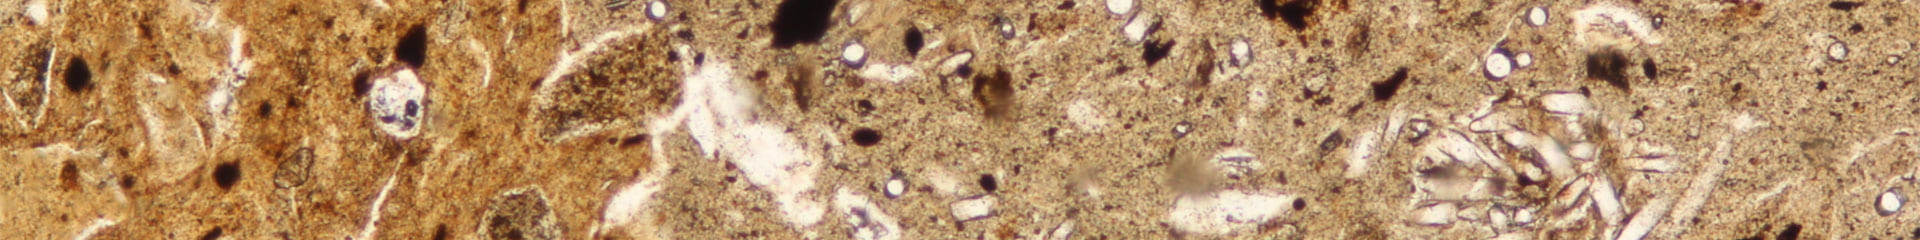 Thin section of a piece of pottery from Brazil that includes sponge spicules mixed into the clay